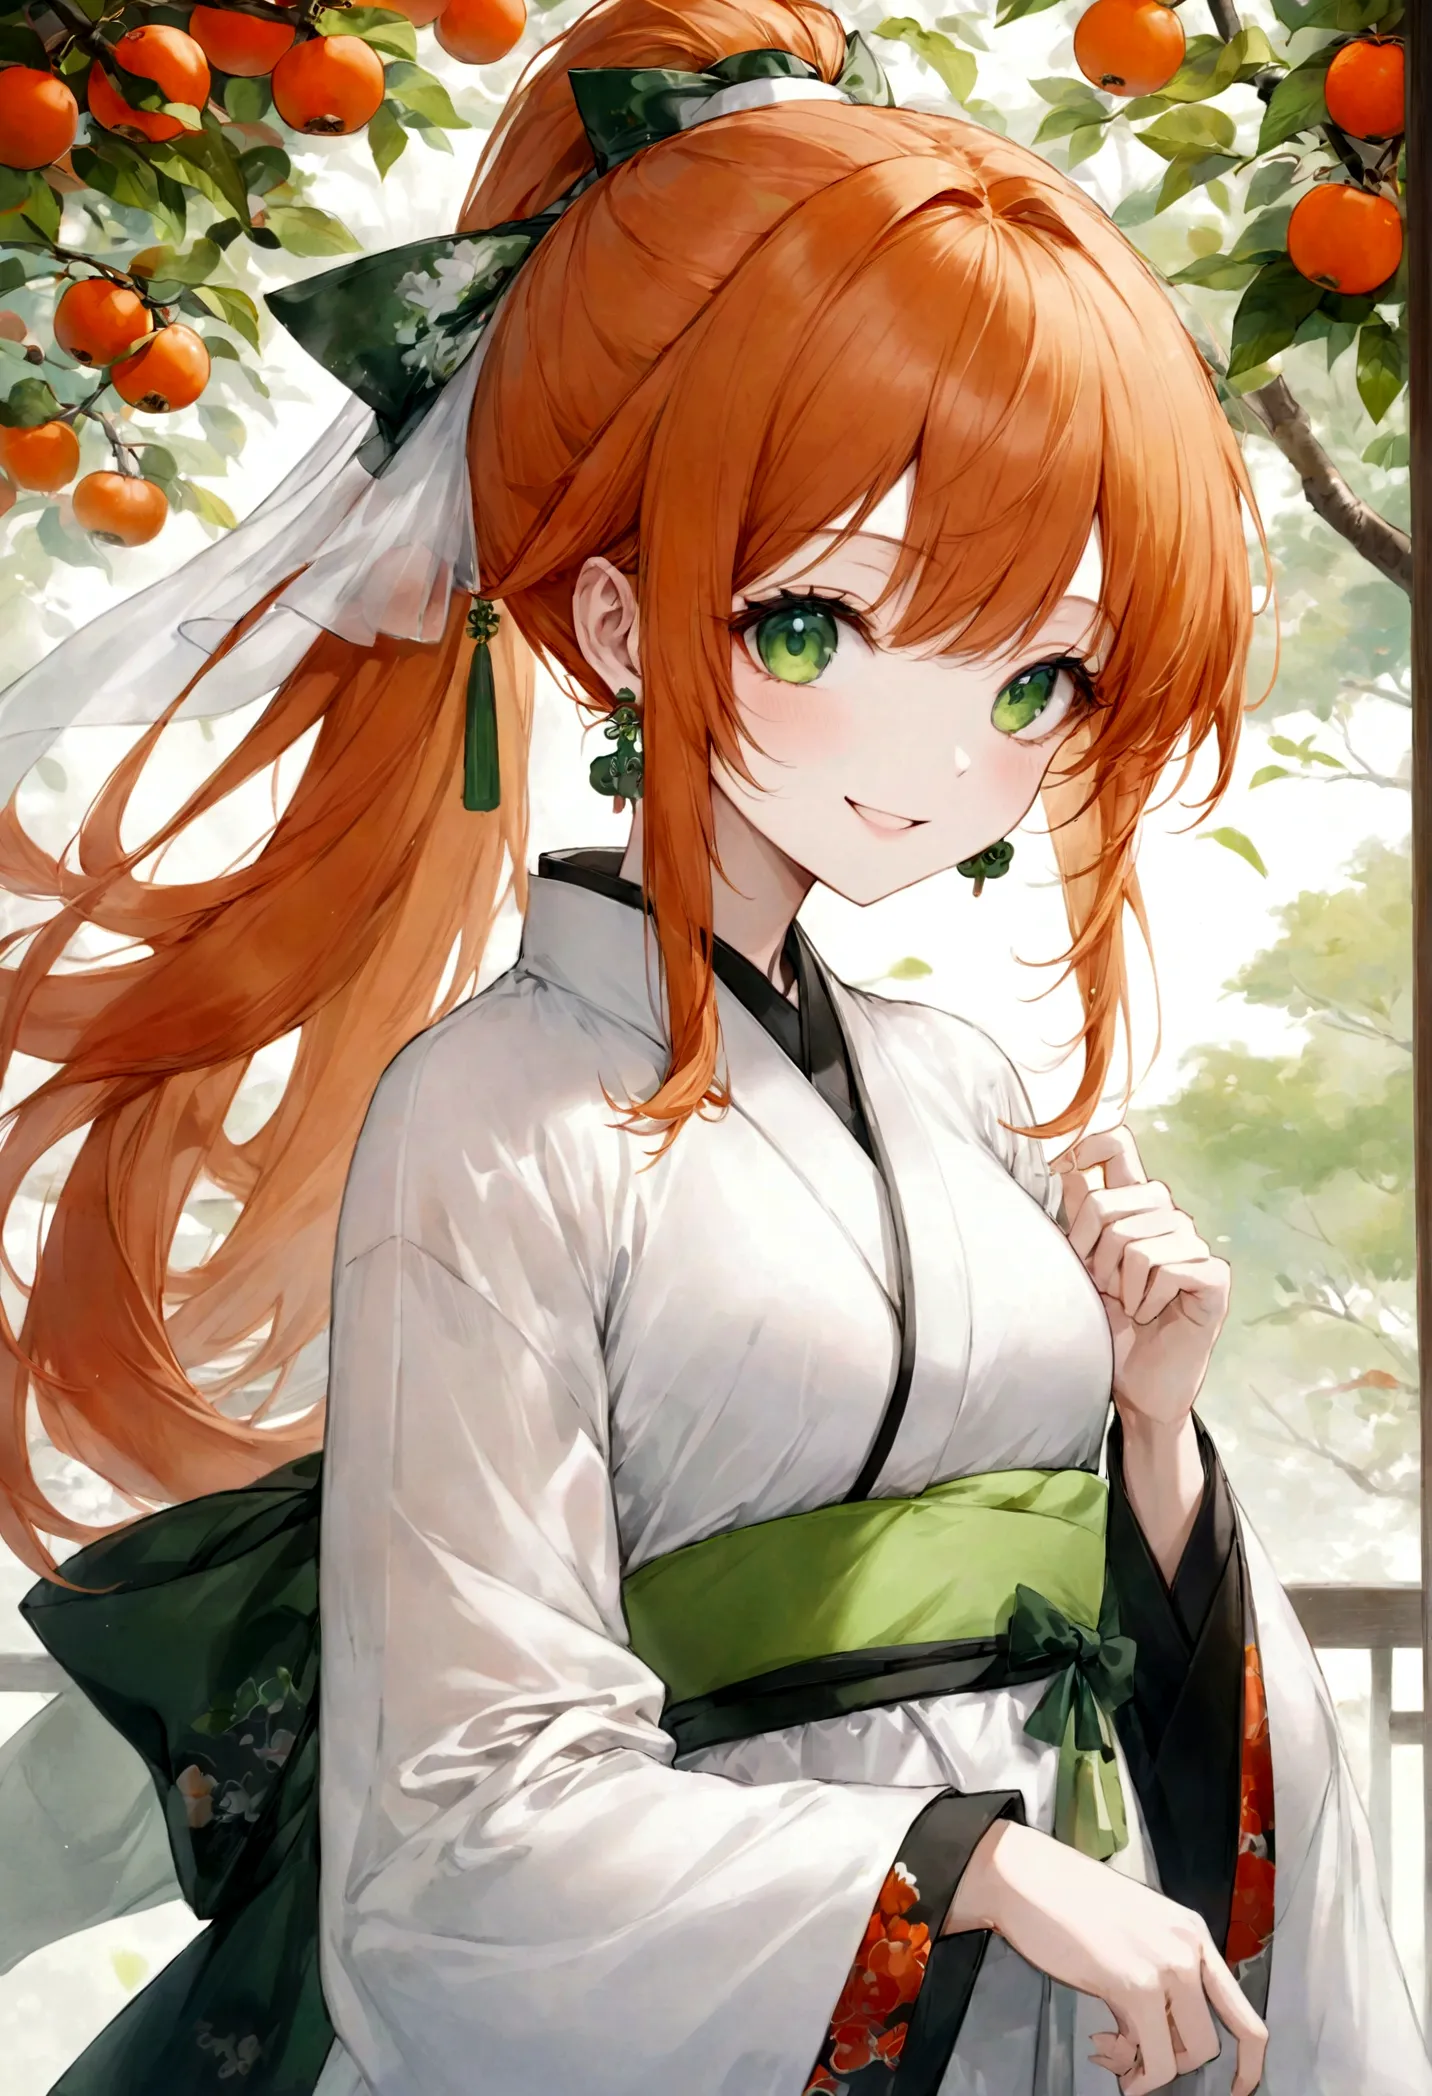 ((top-quality)), ((​masterpiece)), ((ultra-detailliert)), (extremely delicate and beautiful), bright orange hair, long straight hair, long ponytail, spring green eyes, persimmon trees in the background, wuxia styled robes, sheer white sleeves, white robes ...